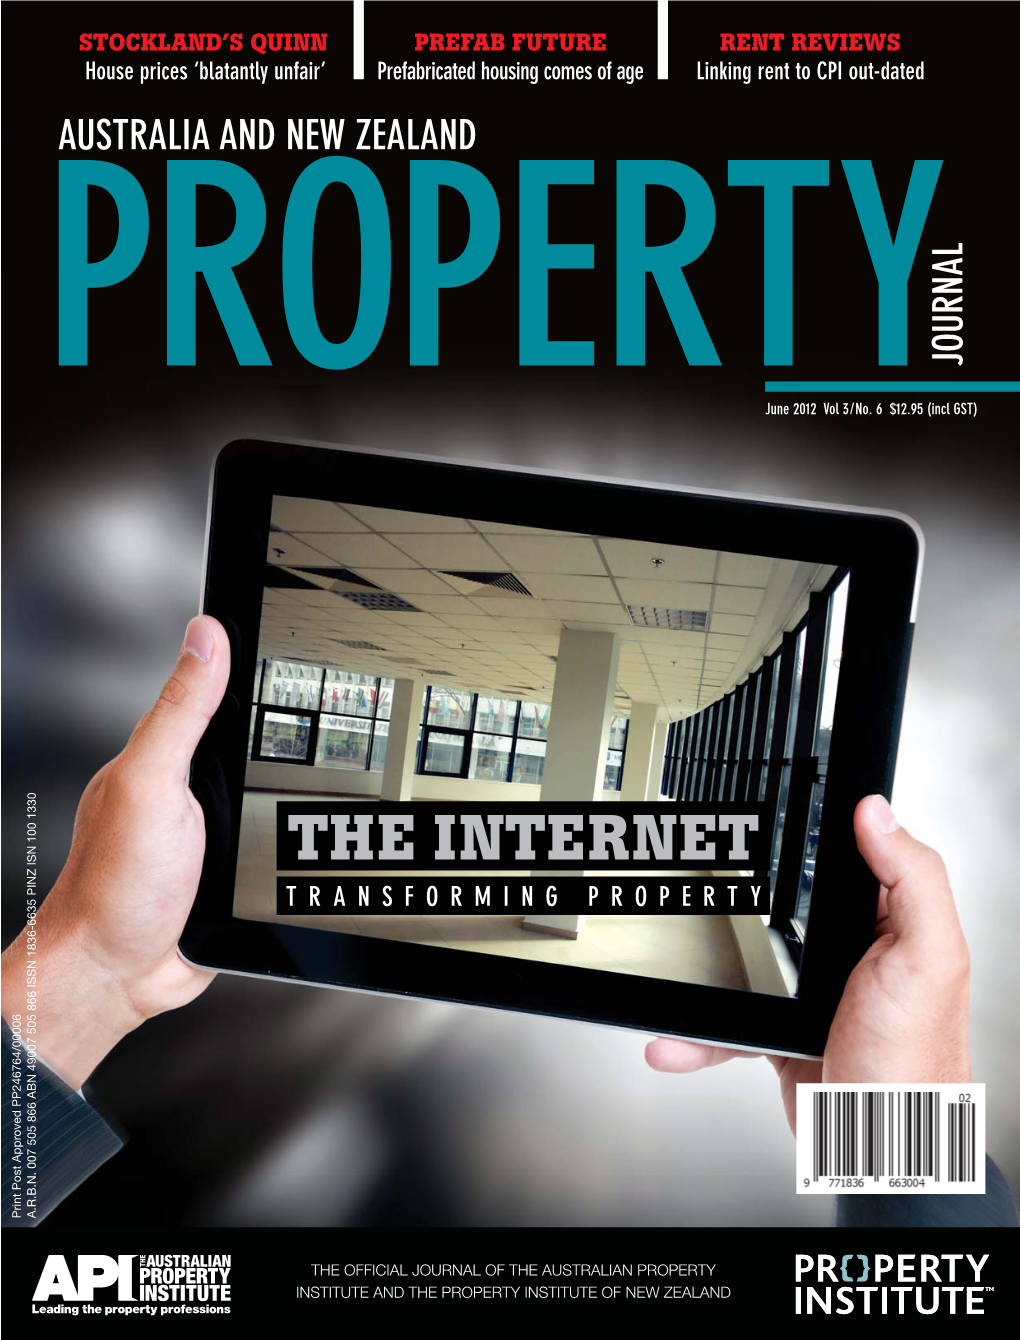 THE INTERNET TRANSFORMING PROPERTY Print Post Approved PP246764/00006 Print Post Approved A.R.B.N